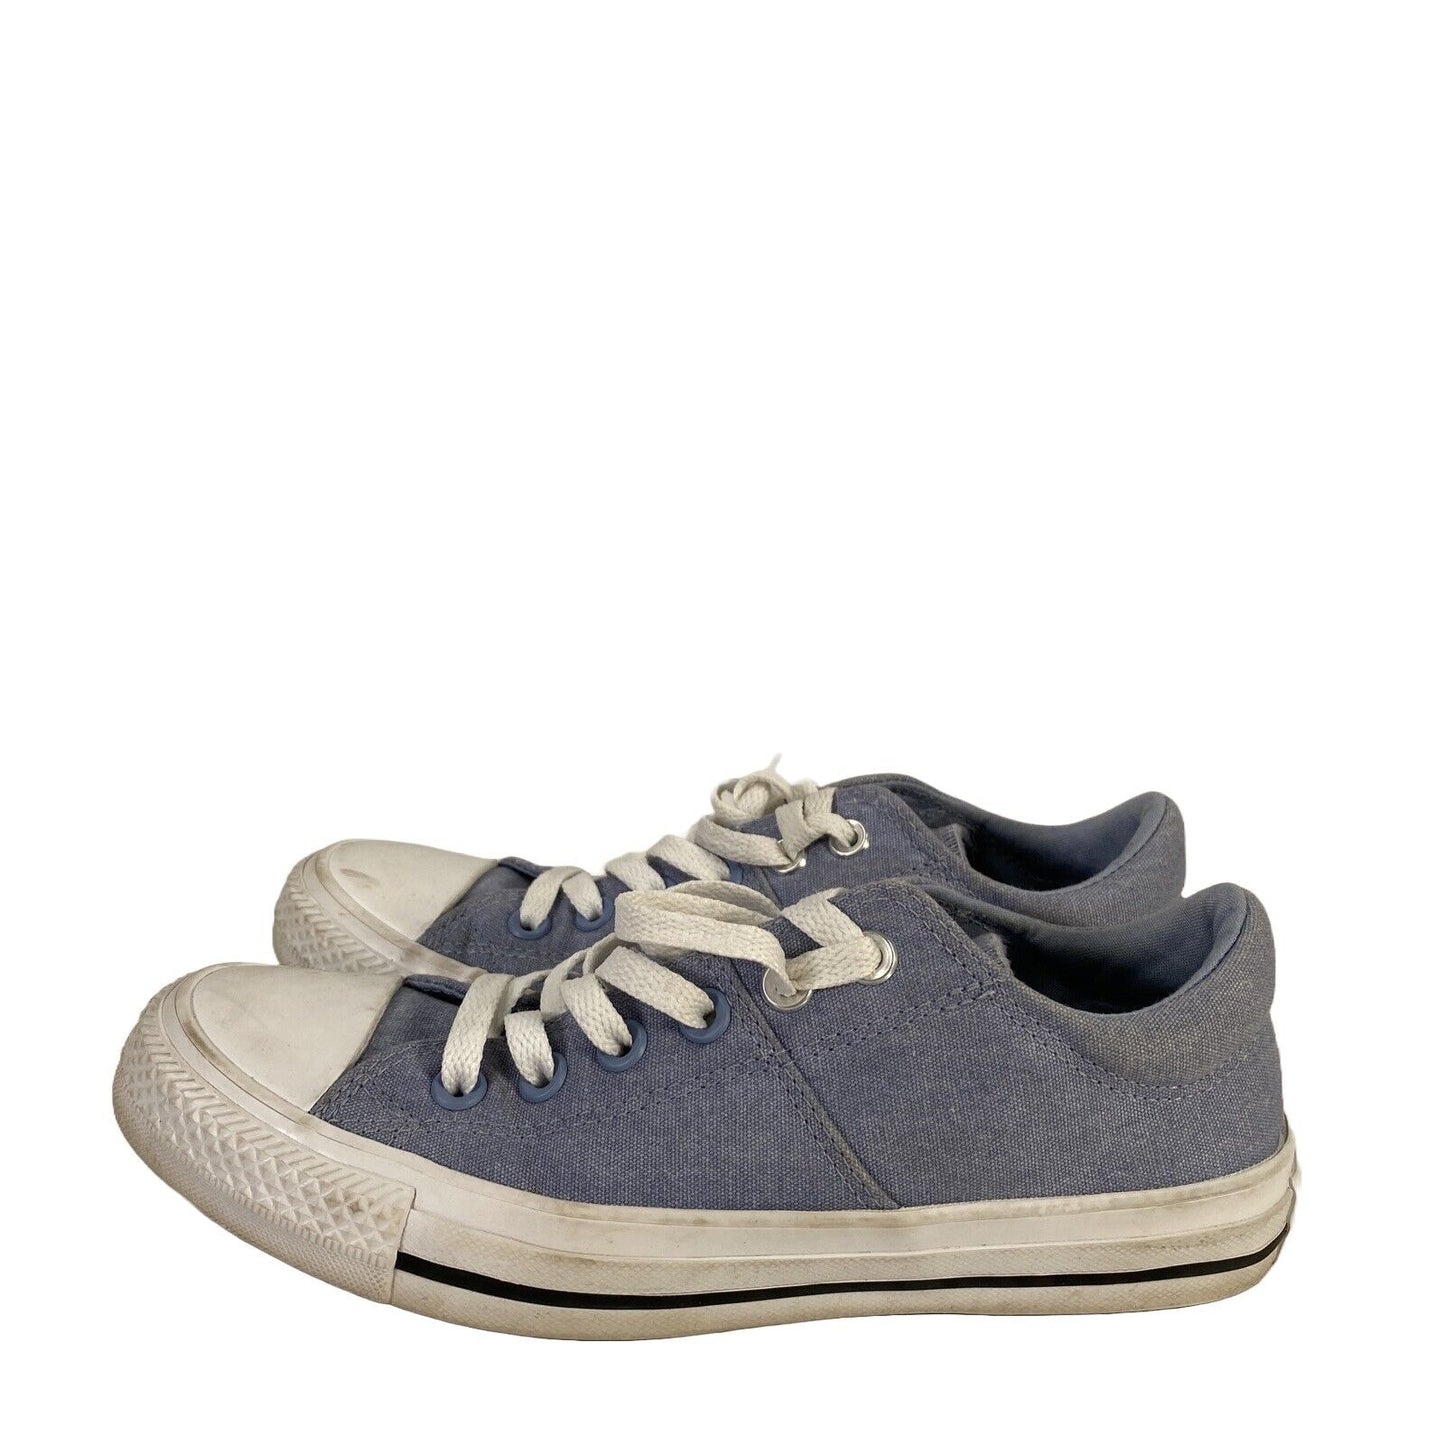 Converse Women's Blue Fabric CTAS Madison Ox Sneakers Shoes - 7